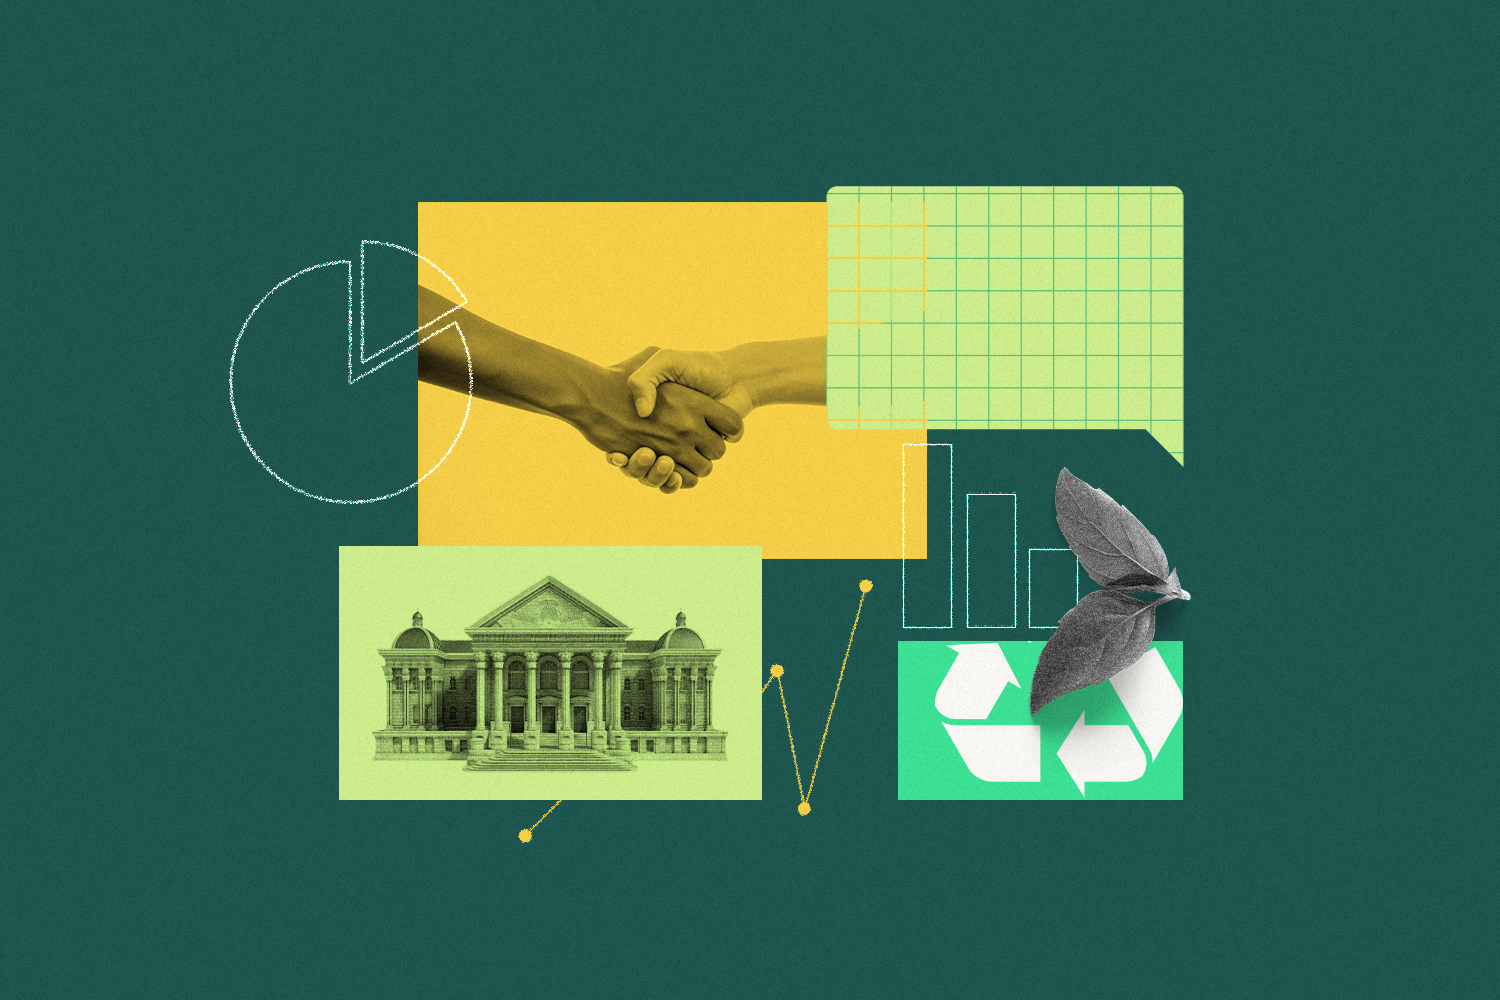 Two hands shaking in embrace, a government building, and two leaves next to a recycling logo surrounded by chart graphics